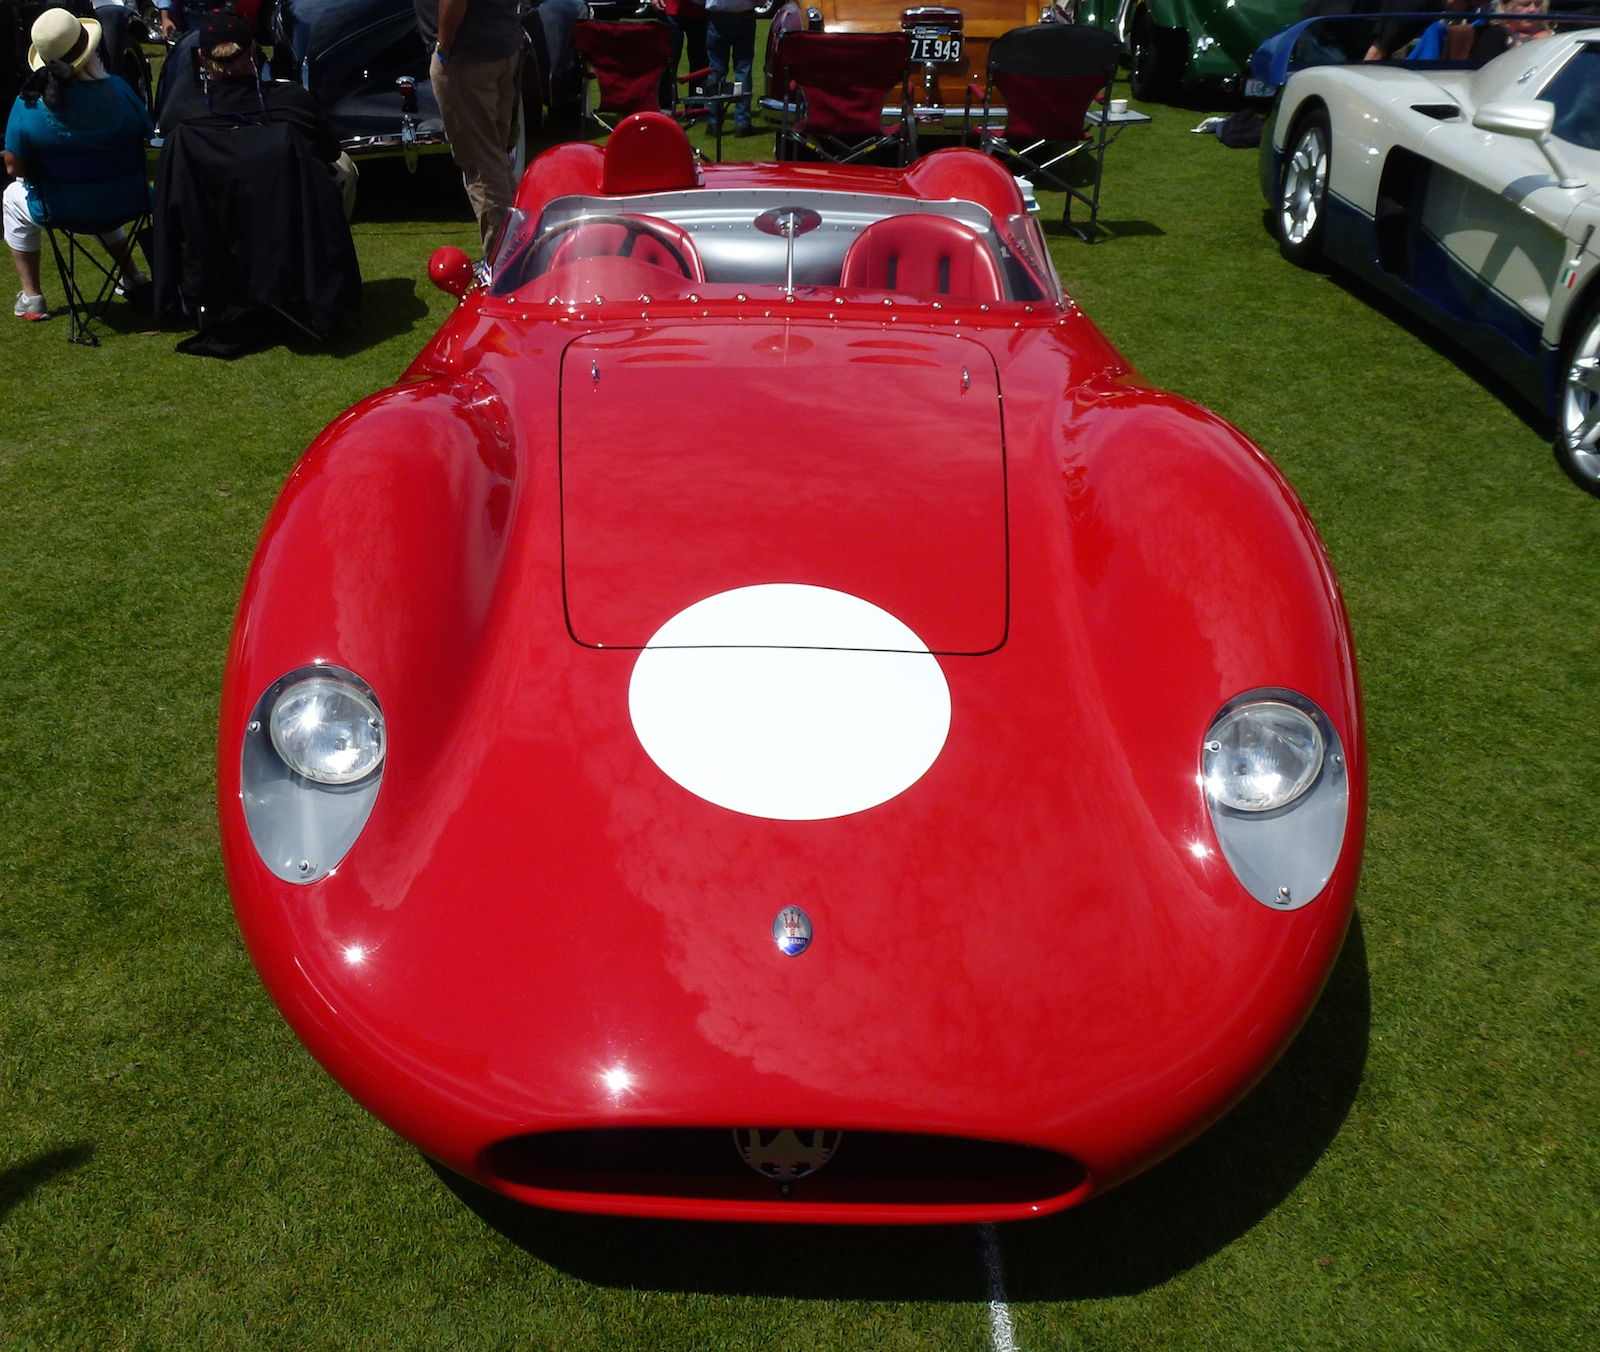 A Fine Day At The Hillsborough Concours d'Elegance in 2014